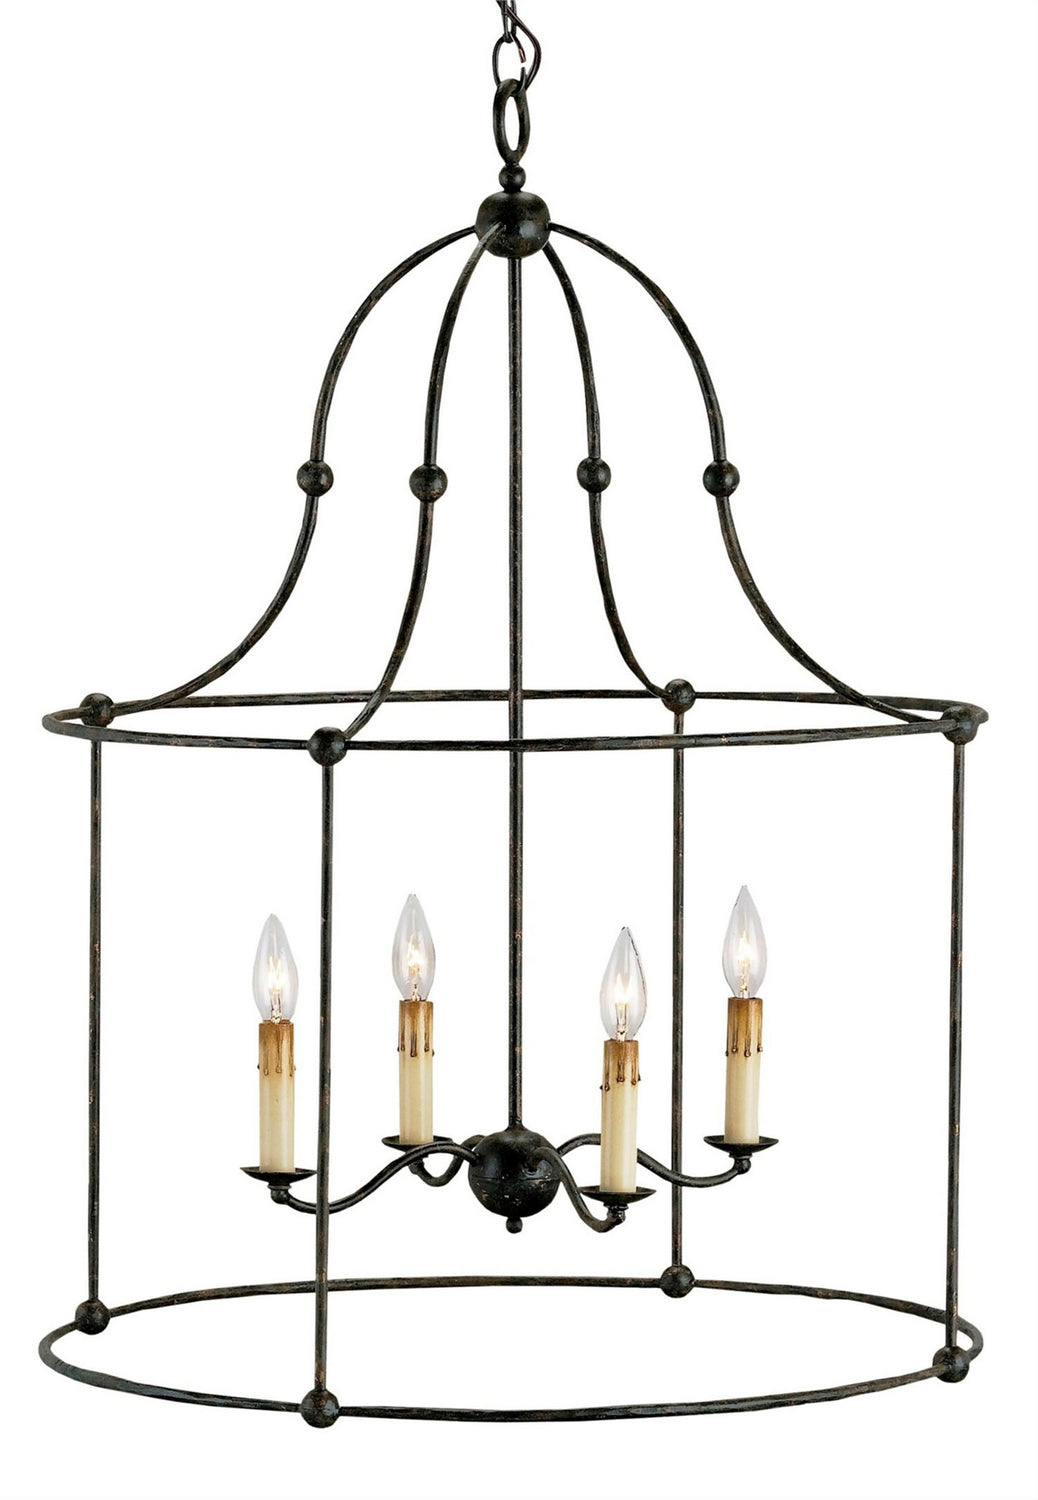 Four Light Lantern from the Fitzjames collection in Mayfair finish